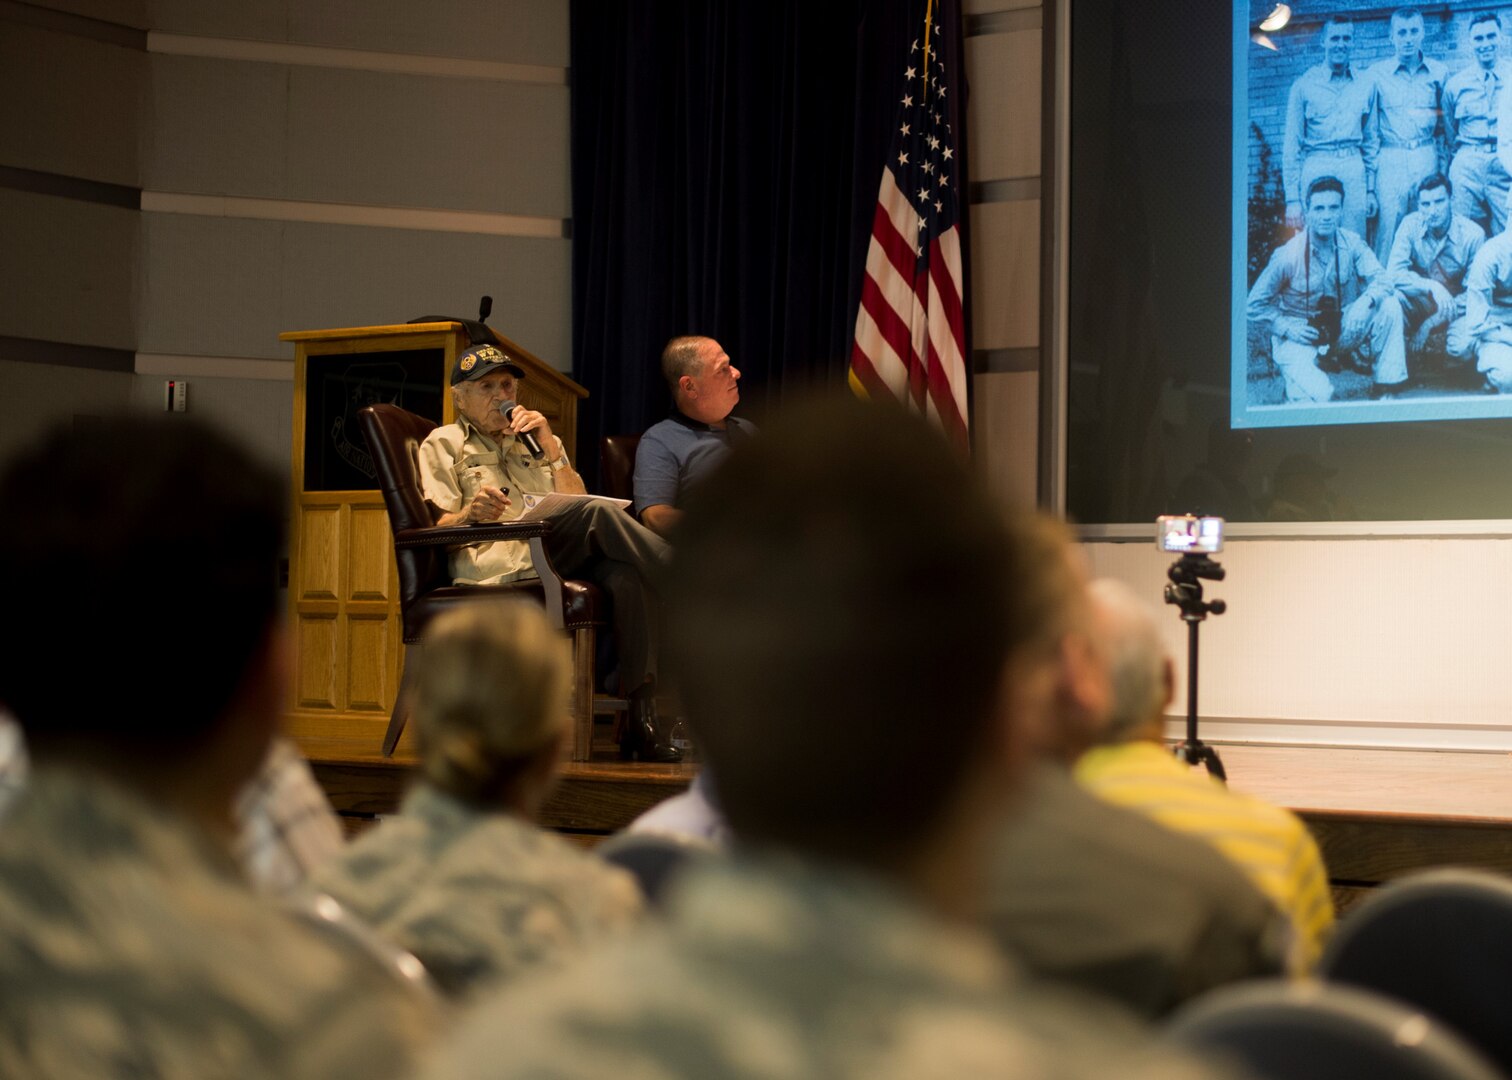 U.S. Army Air Corps 1st Lt. (ret) Raymond Firmani, World War II B-17 pilot, left and Mr. Mitchell Topal, 166th Airlift Wing public affairs specialist, right, speak to the crowd during a Hangar Talk at New Castle Air National Guard Base Del., Aug. 10, 2019. Firmani served as a B-17 pilot and flew 25 combat missions during World War II in 1944 and 1945. (U.S. Air National Guard Photo by Staff Sgt. Katherine Miller)